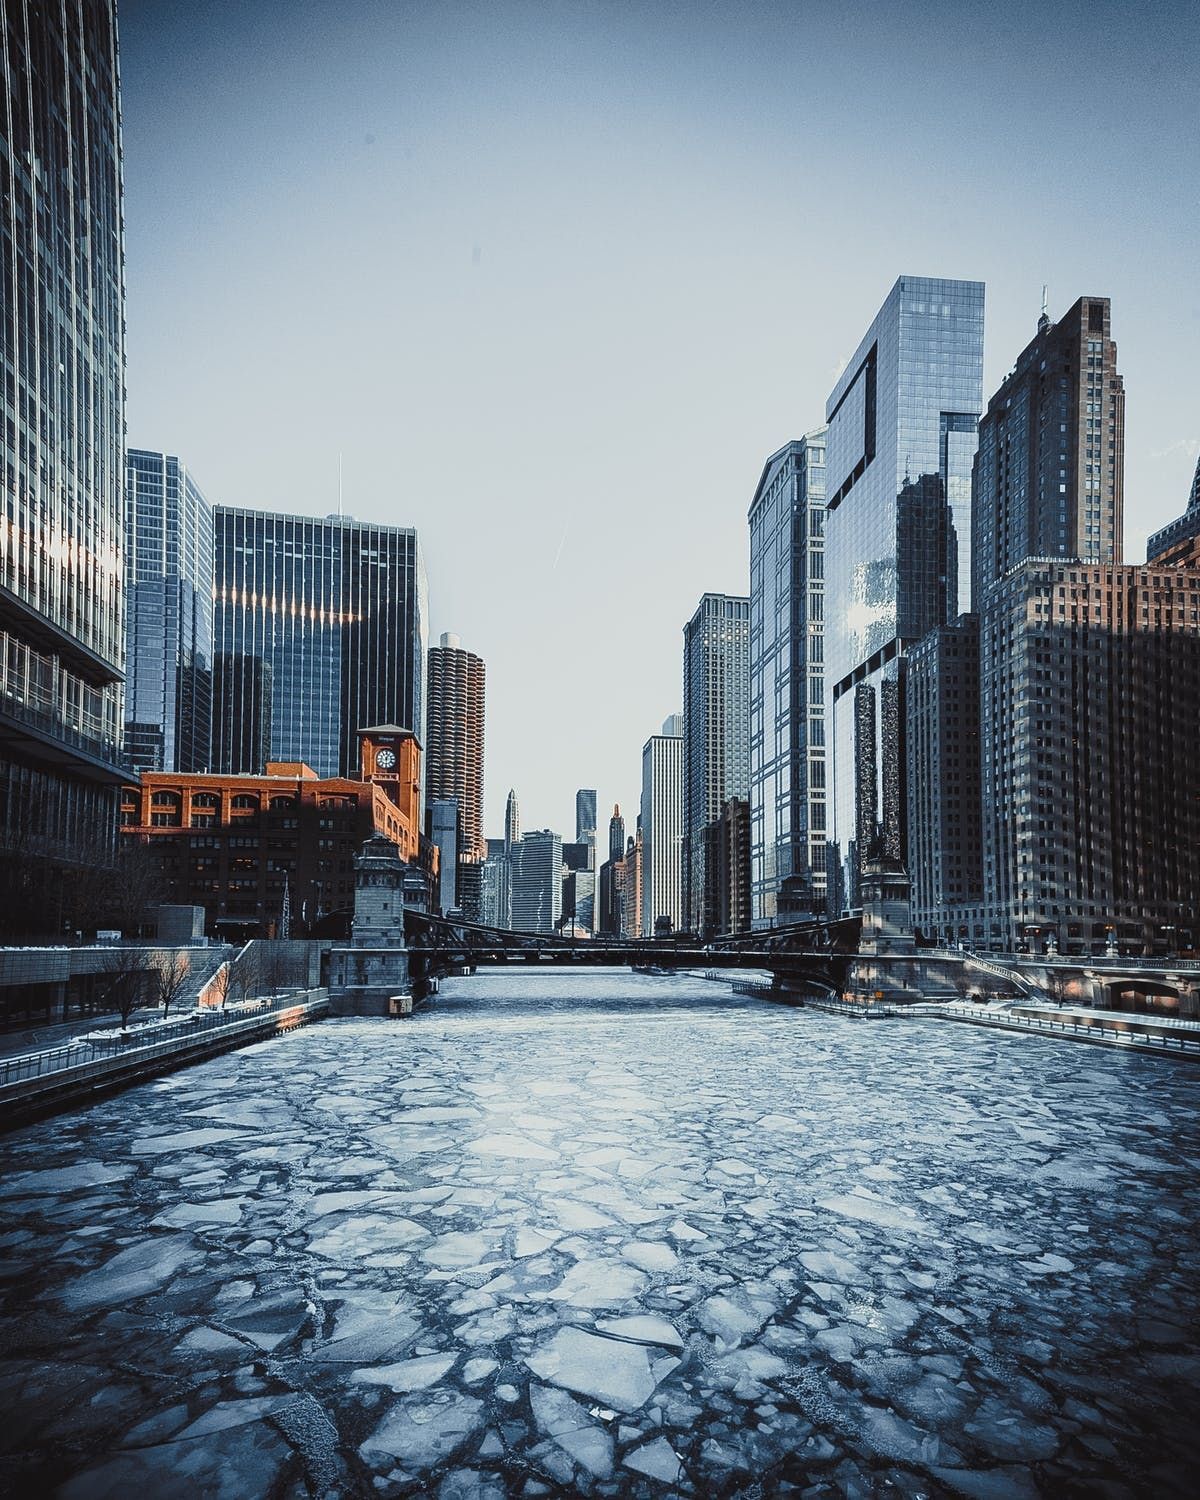 A city with tall buildings and water - Chicago, New York